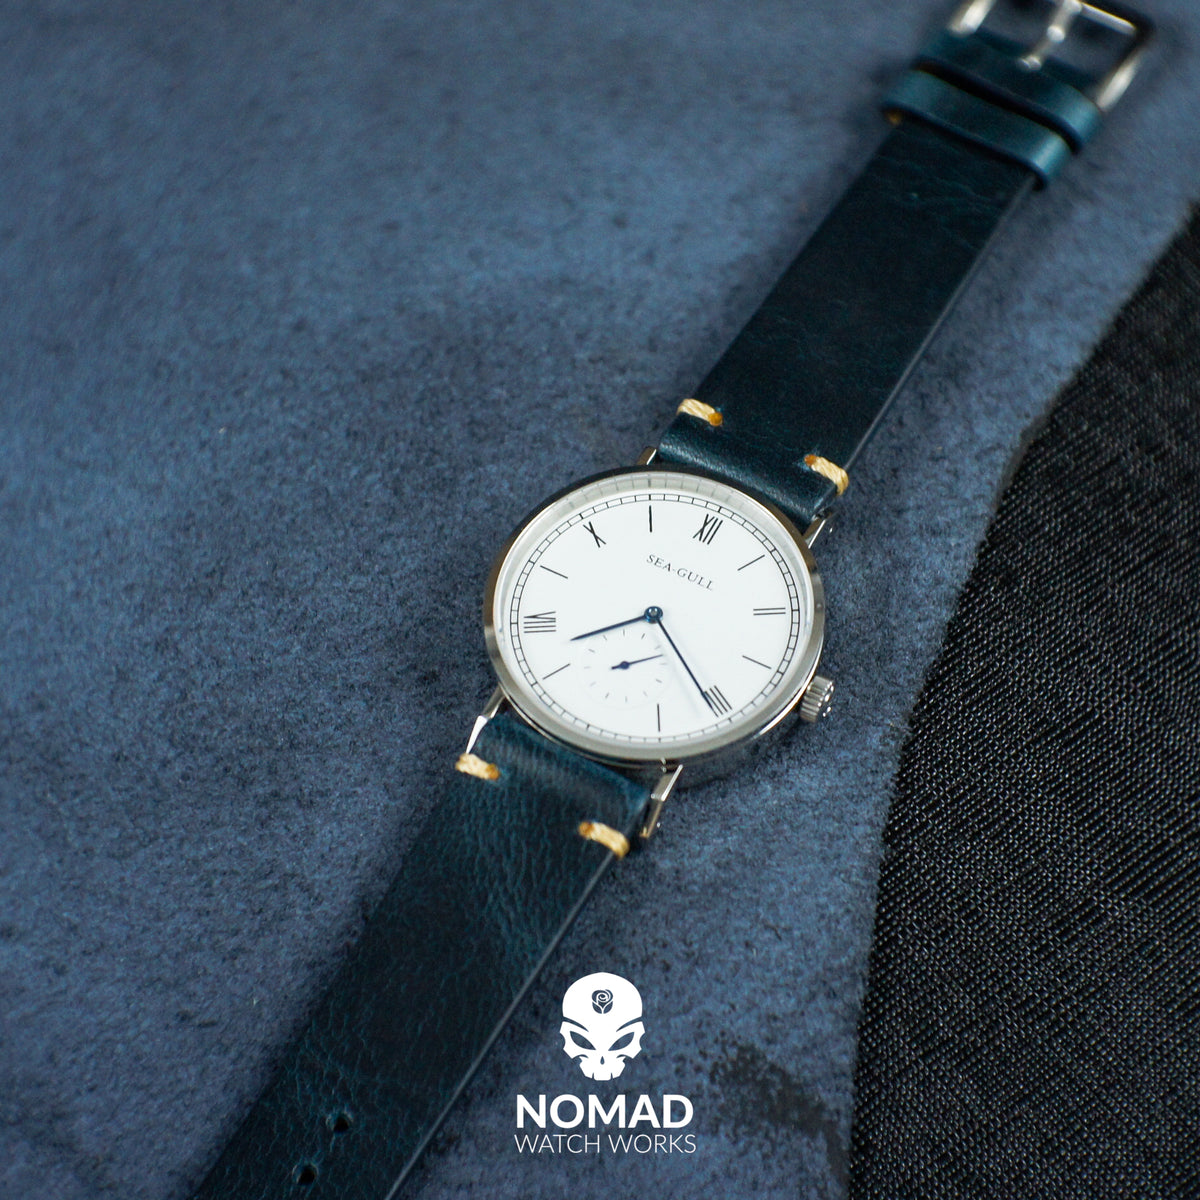 Premium Vintage Oil Waxed Leather Watch Strap in Navy (18mm) - Nomad Watch Works Malaysia